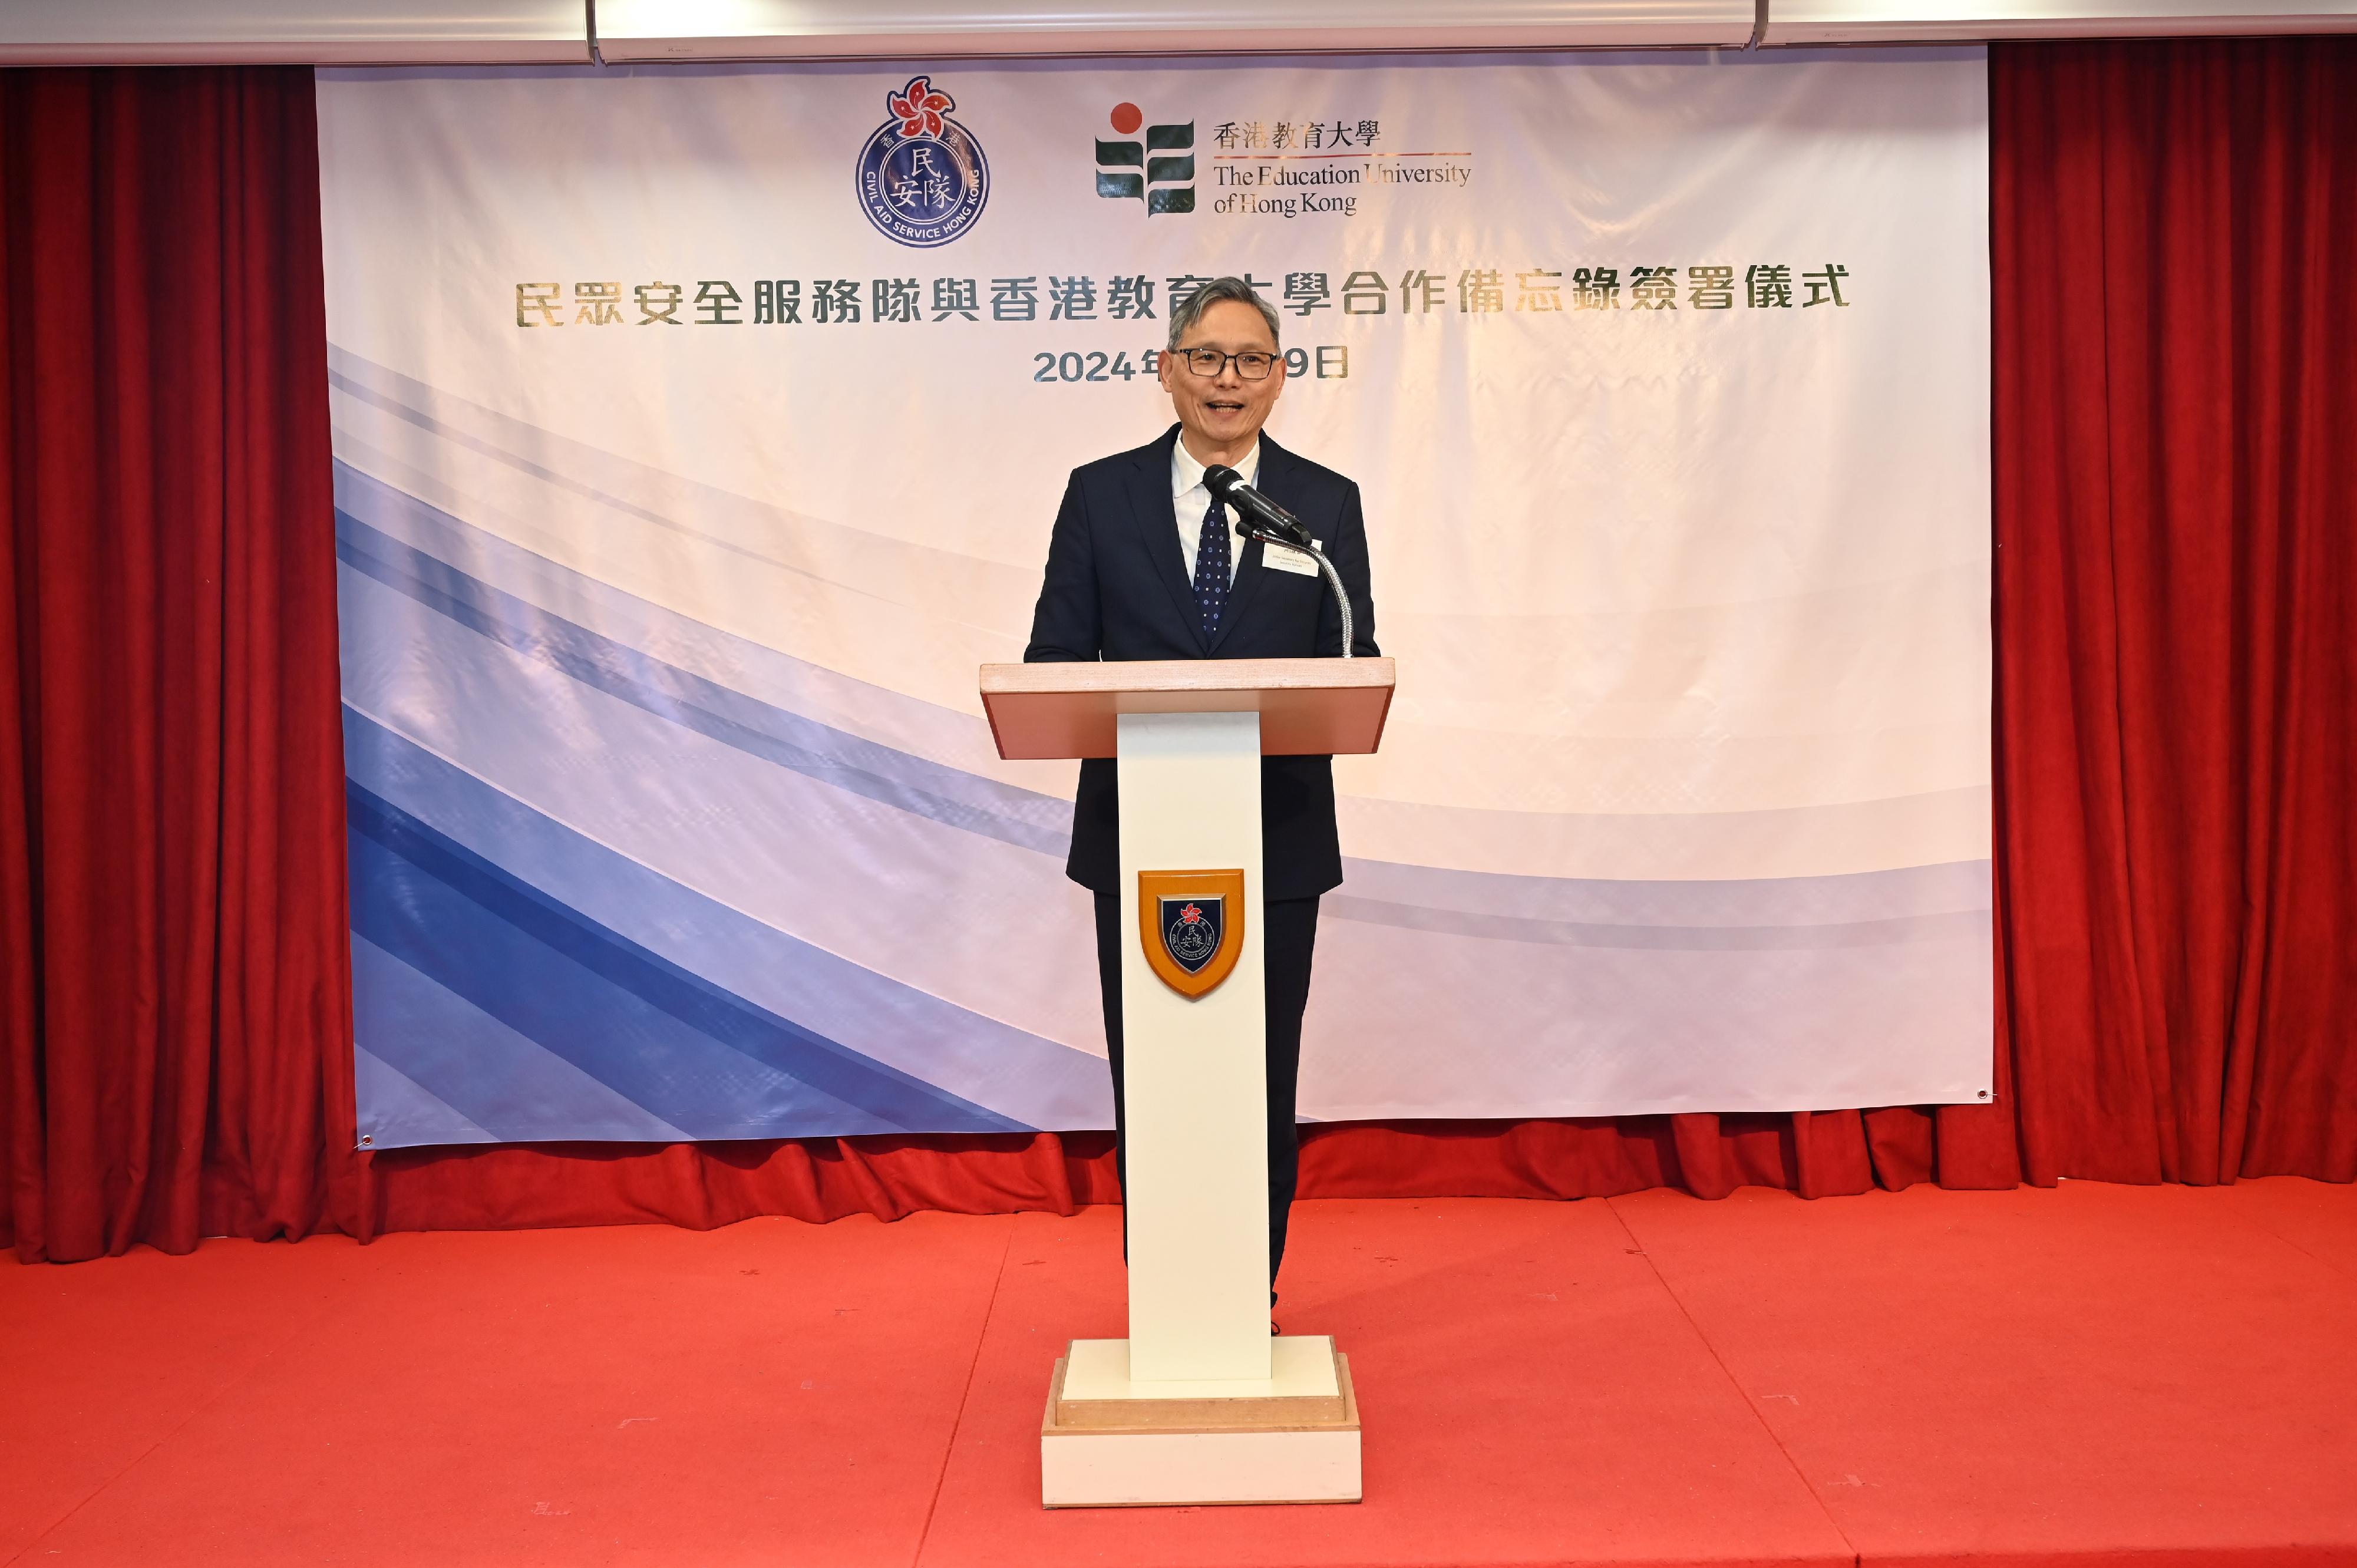 The Civil Aid Service and the Education University of Hong Kong signed a Memorandum of Understanding today (January 29) to underpin a closer collaboration. Photo shows the Under Secretary for Security, Mr Michael Cheuk, delivering a speech at the signing ceremony.